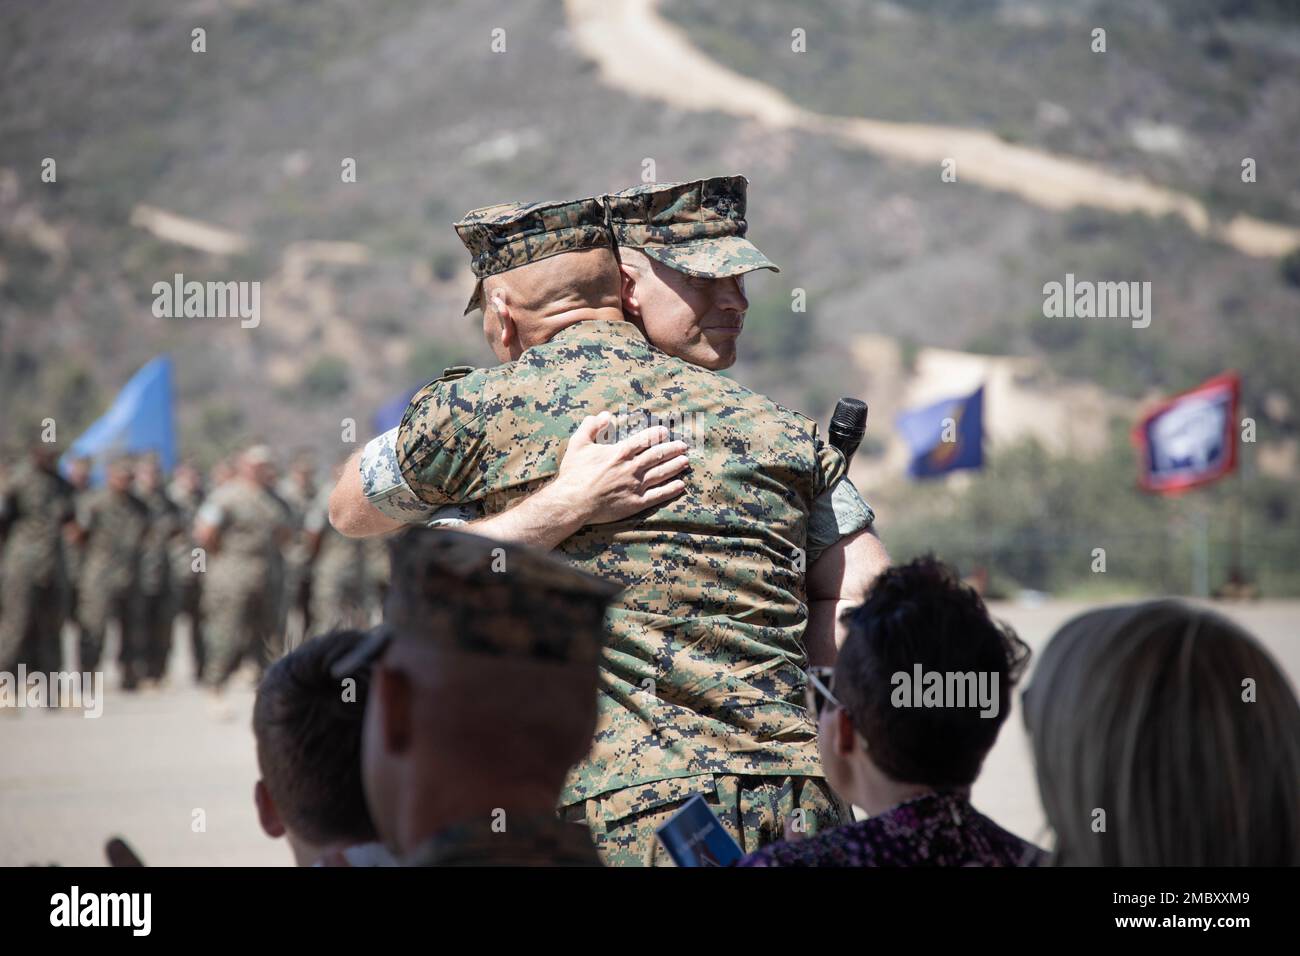 U.S. Marine Corps Col. Brandon Graham, the outgoing commanding officer of 1st Marine Regiment, 1st Marine Division (1st MARDIV), and Col. Brendan Sullivan, the incoming commanding officer of 1st Marine Regiment, 1st MARDIV, embrace during a change of command ceremony at Marine Corps Base Camp Pendleton, California, June 23, 2022. During the ceremony, Graham relinquished command of 1st Marine Regiment to Sullivan. Stock Photo